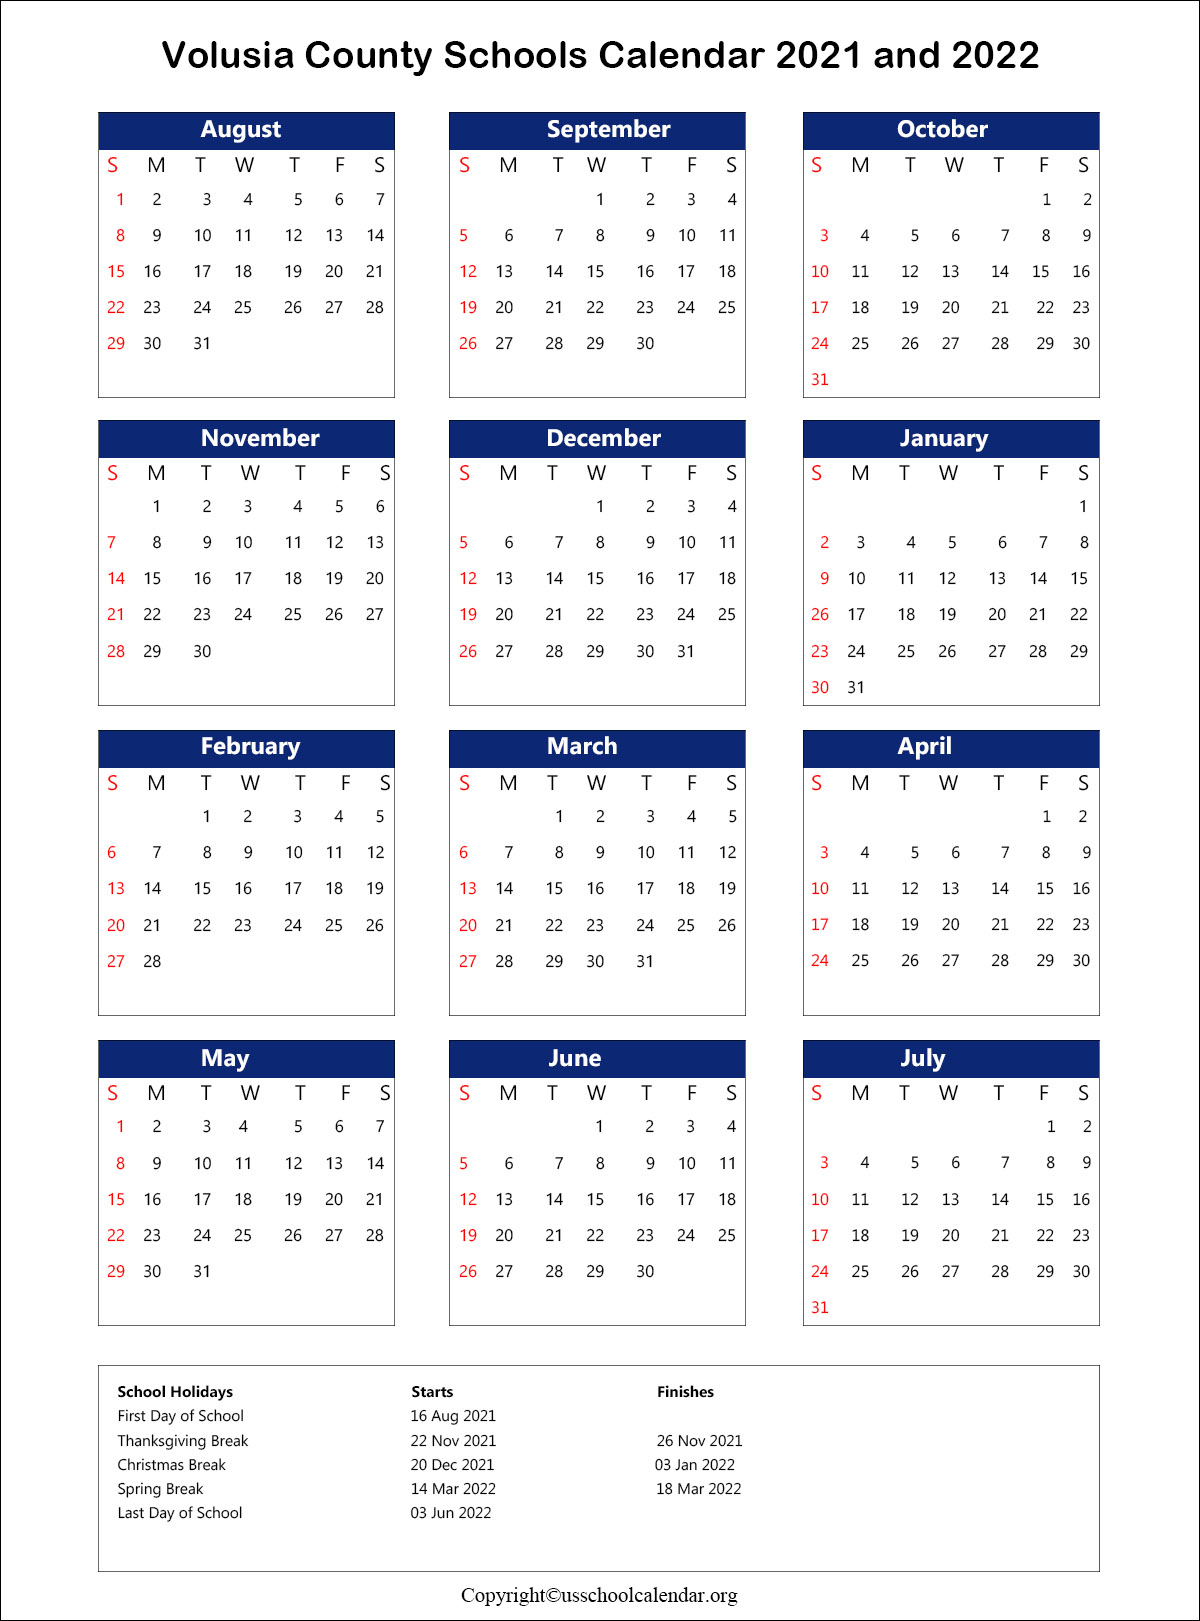 Volusia County School Calendar with Holidays 2021 2022